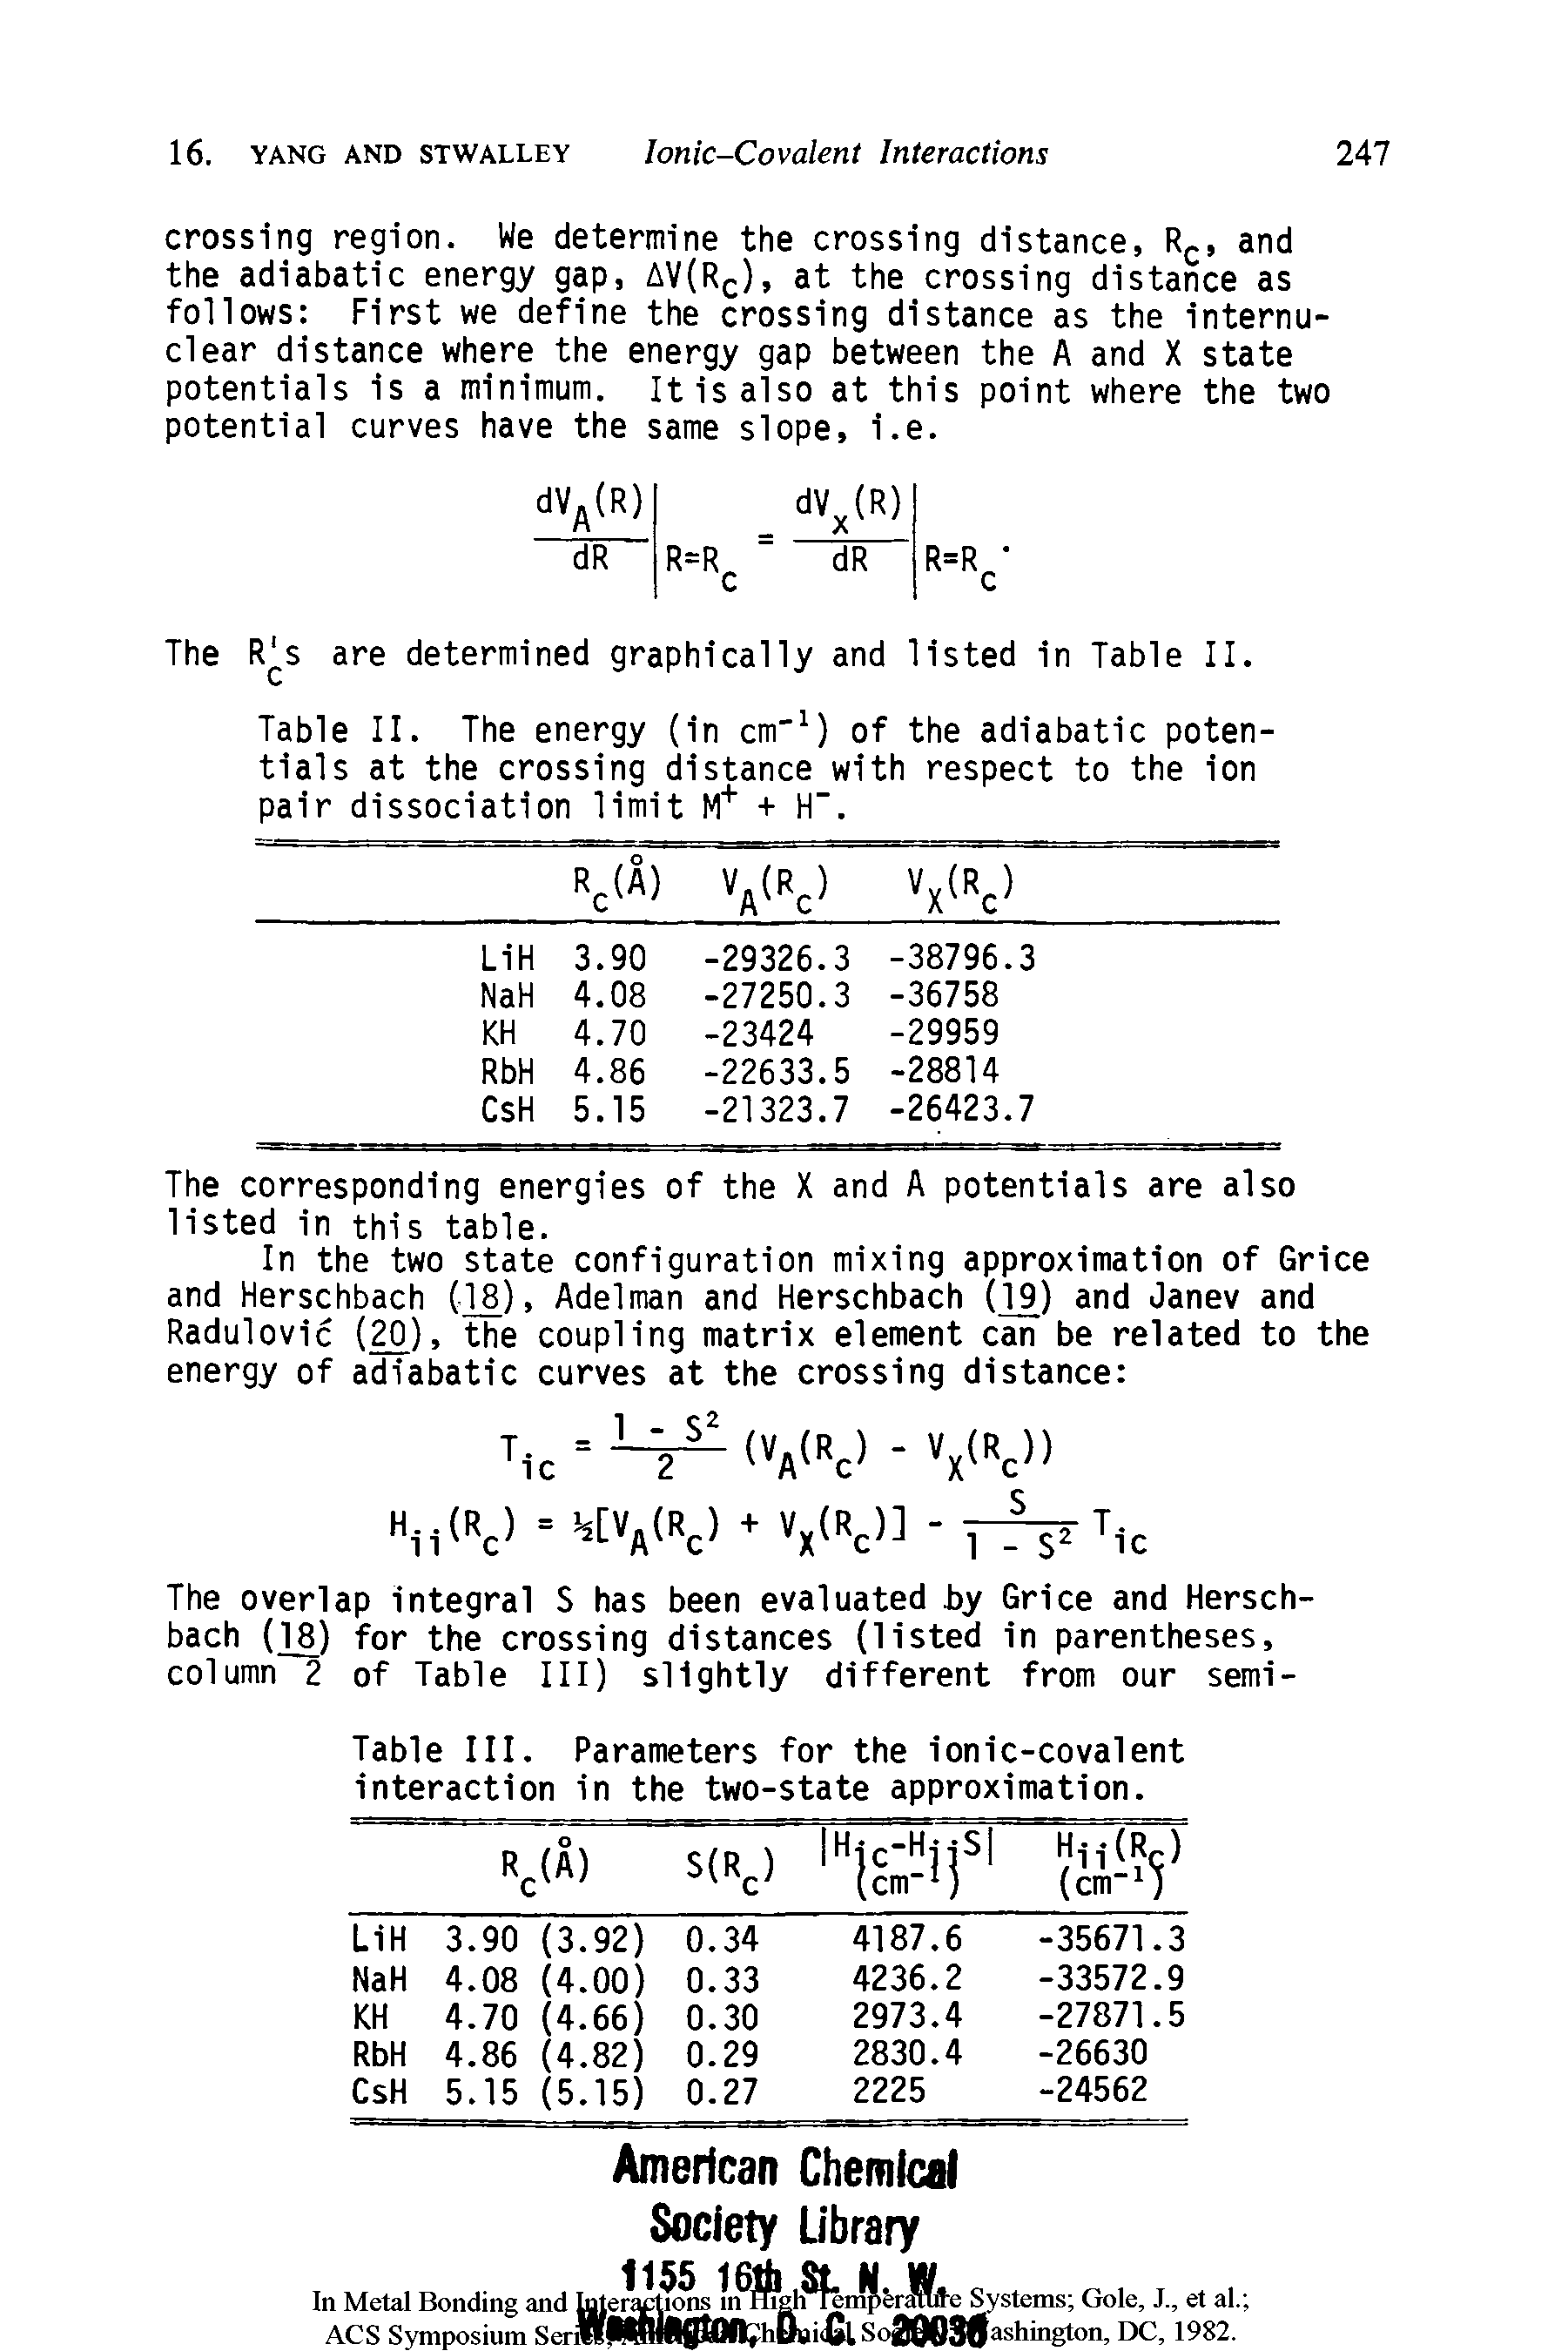 Table III. Parameters for the ionic-covalent interaction in the two-state approximation.